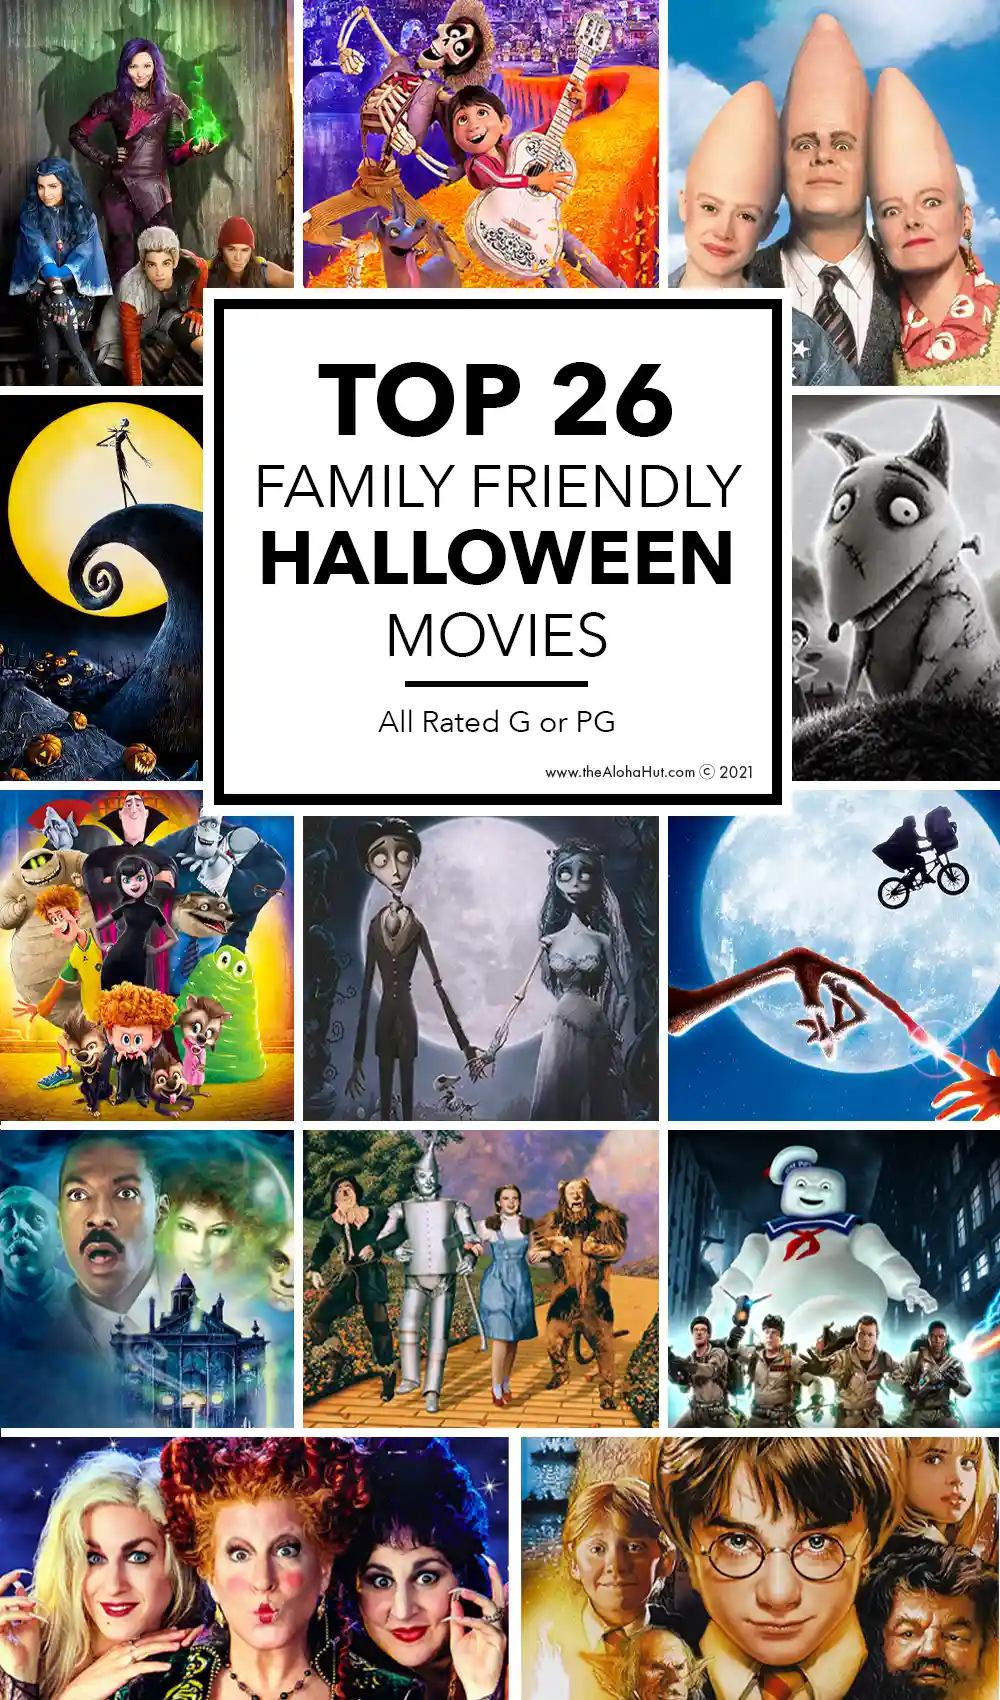 Family Friendly Halloween Movies - Top Halloween Movies List for Kids